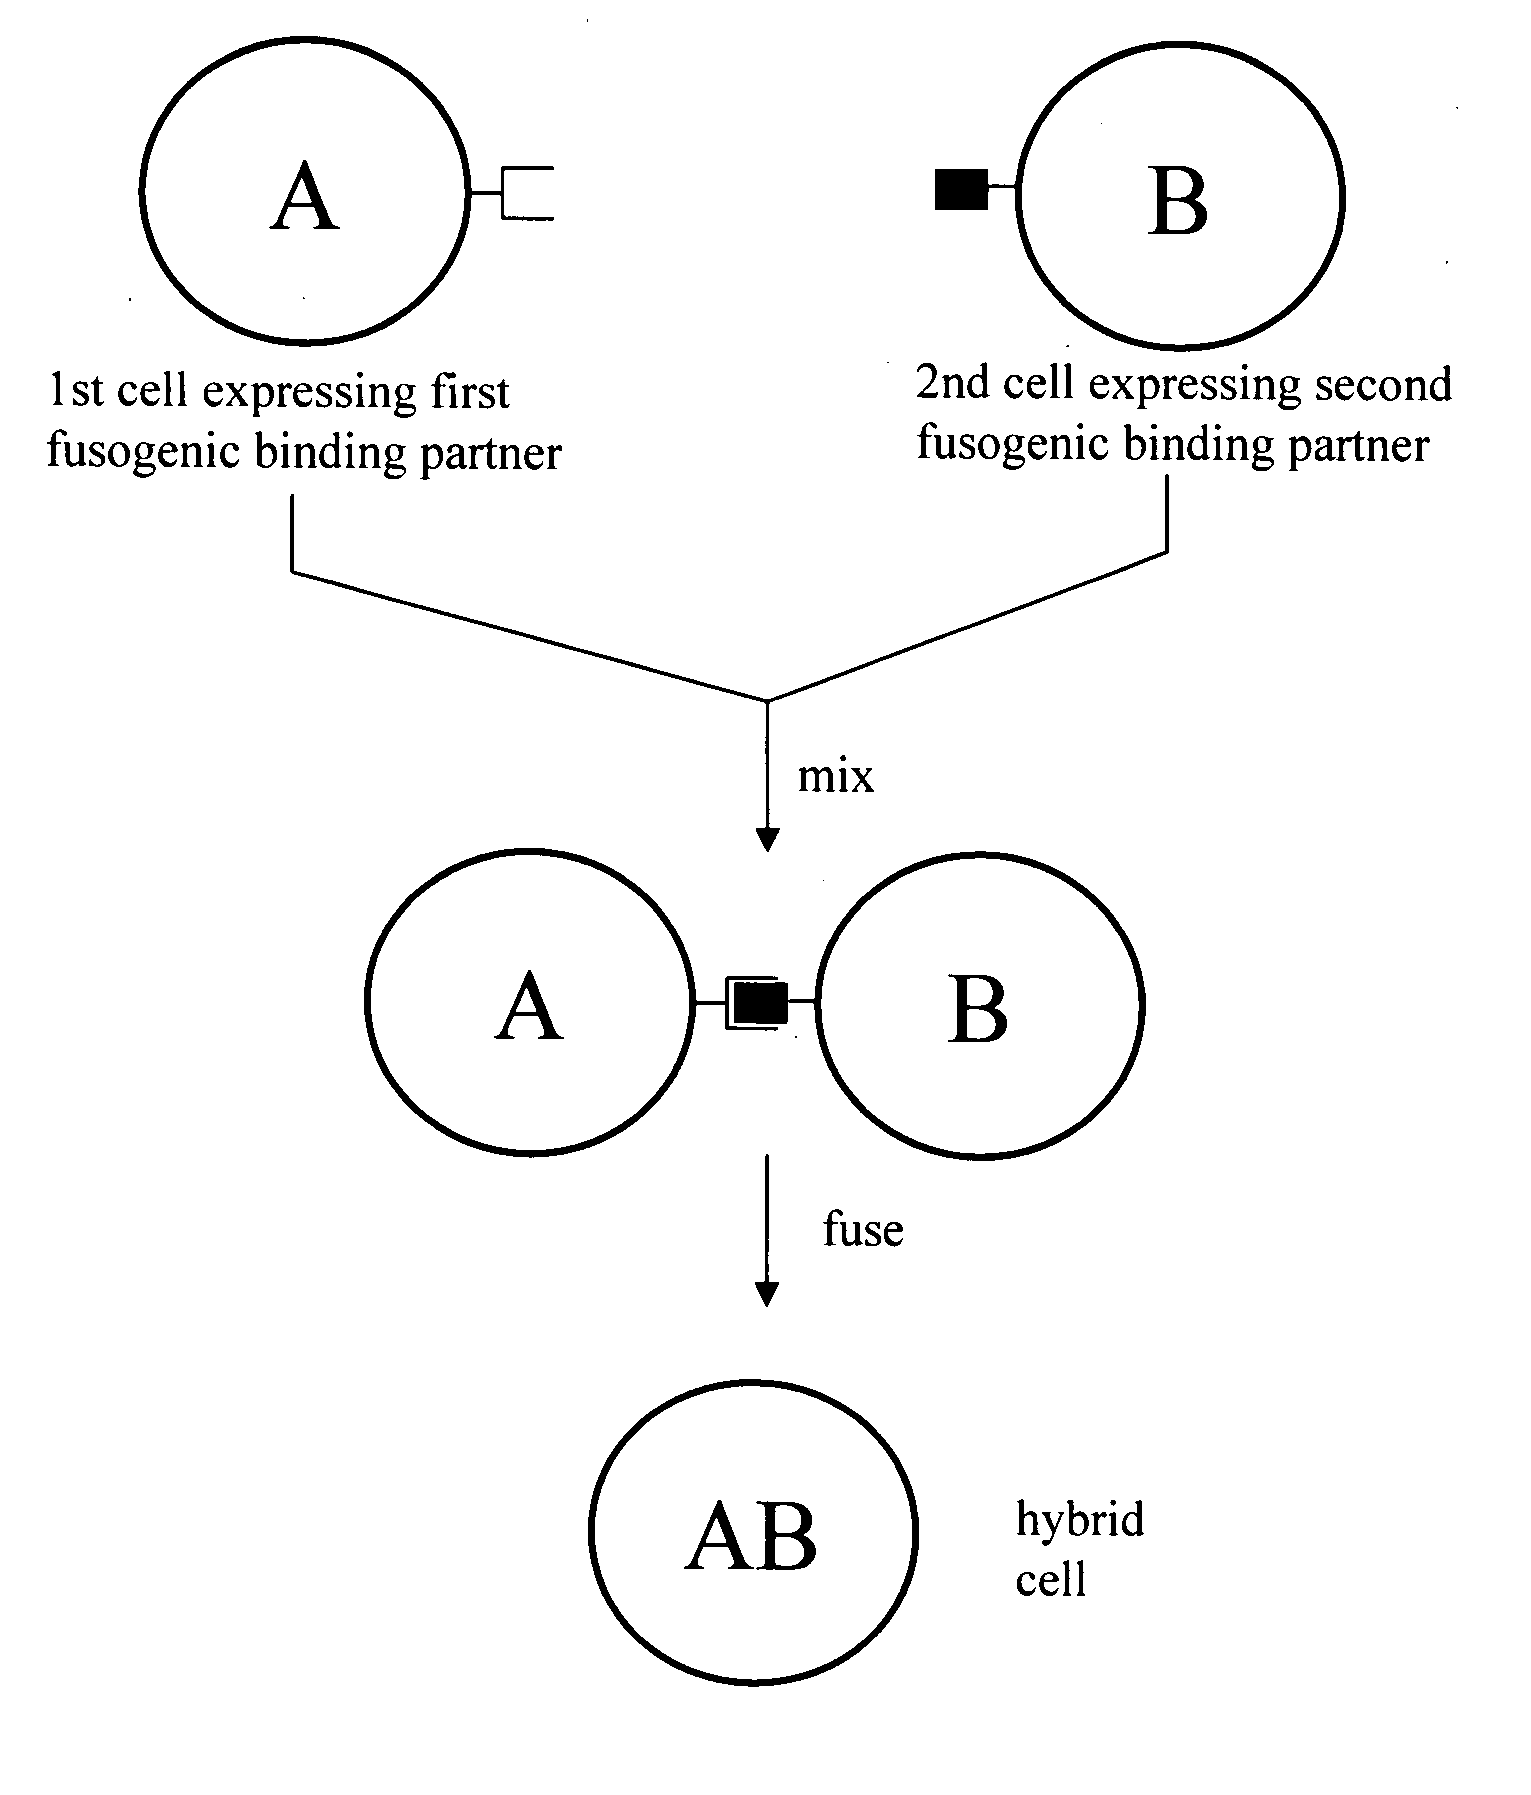 Cell fusion method